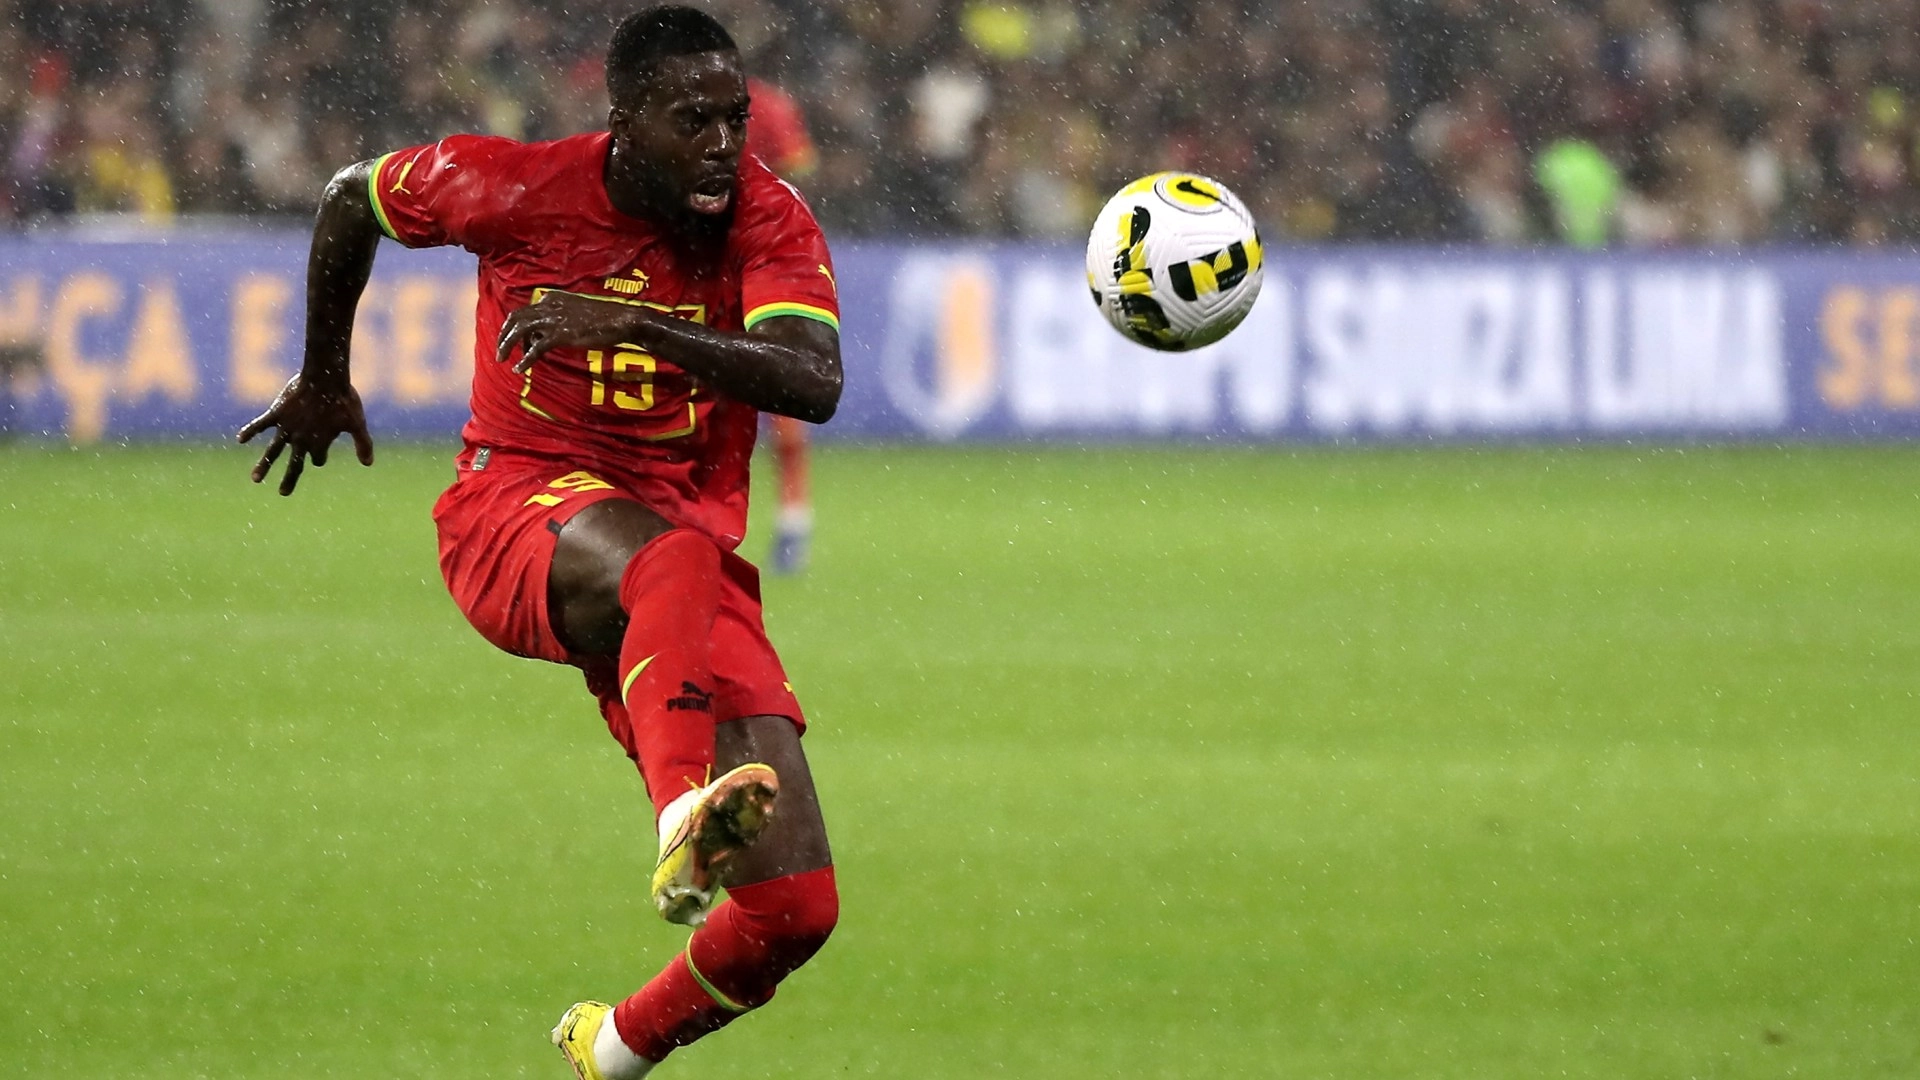 2023 AFCON qualifiers: "I'm coming home" - Inaki Williams urges fans to fill Baba Yara for Ghana vs Angola clash